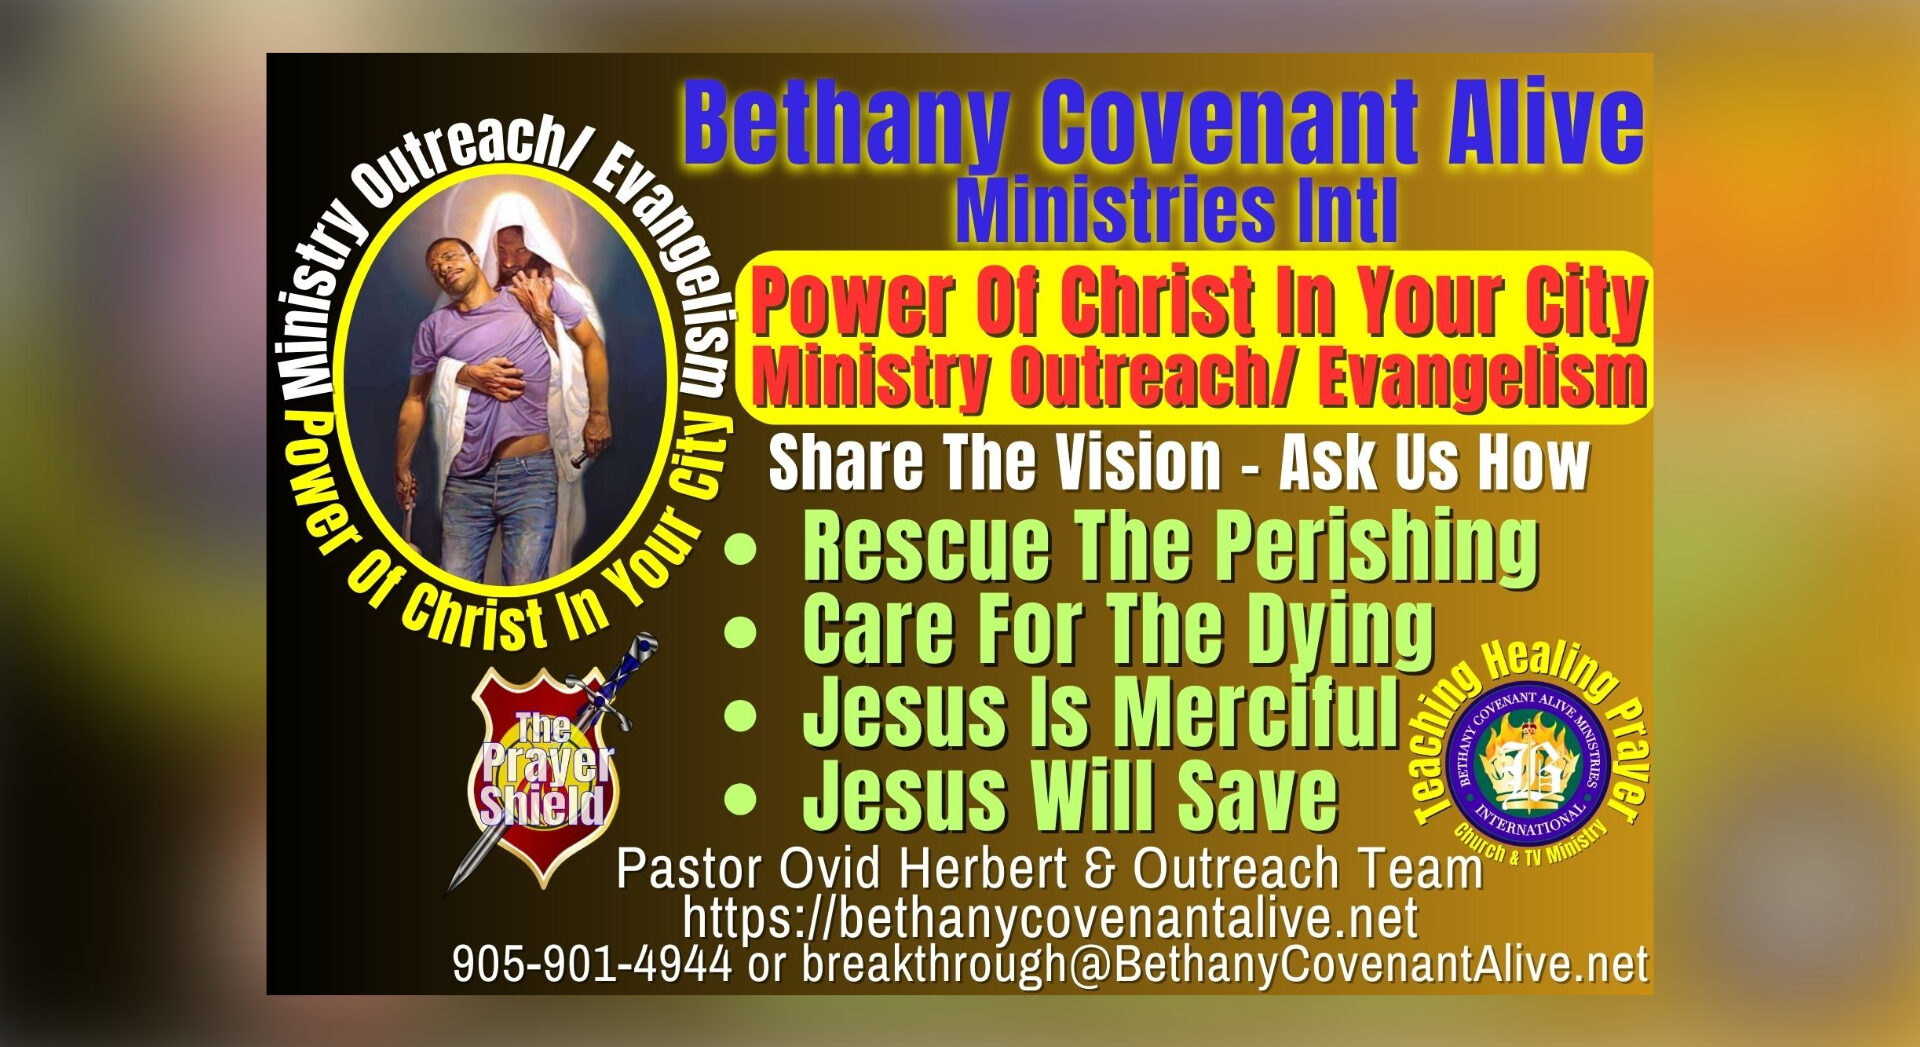 Power Of Christ In Your City - Our Outreach Program